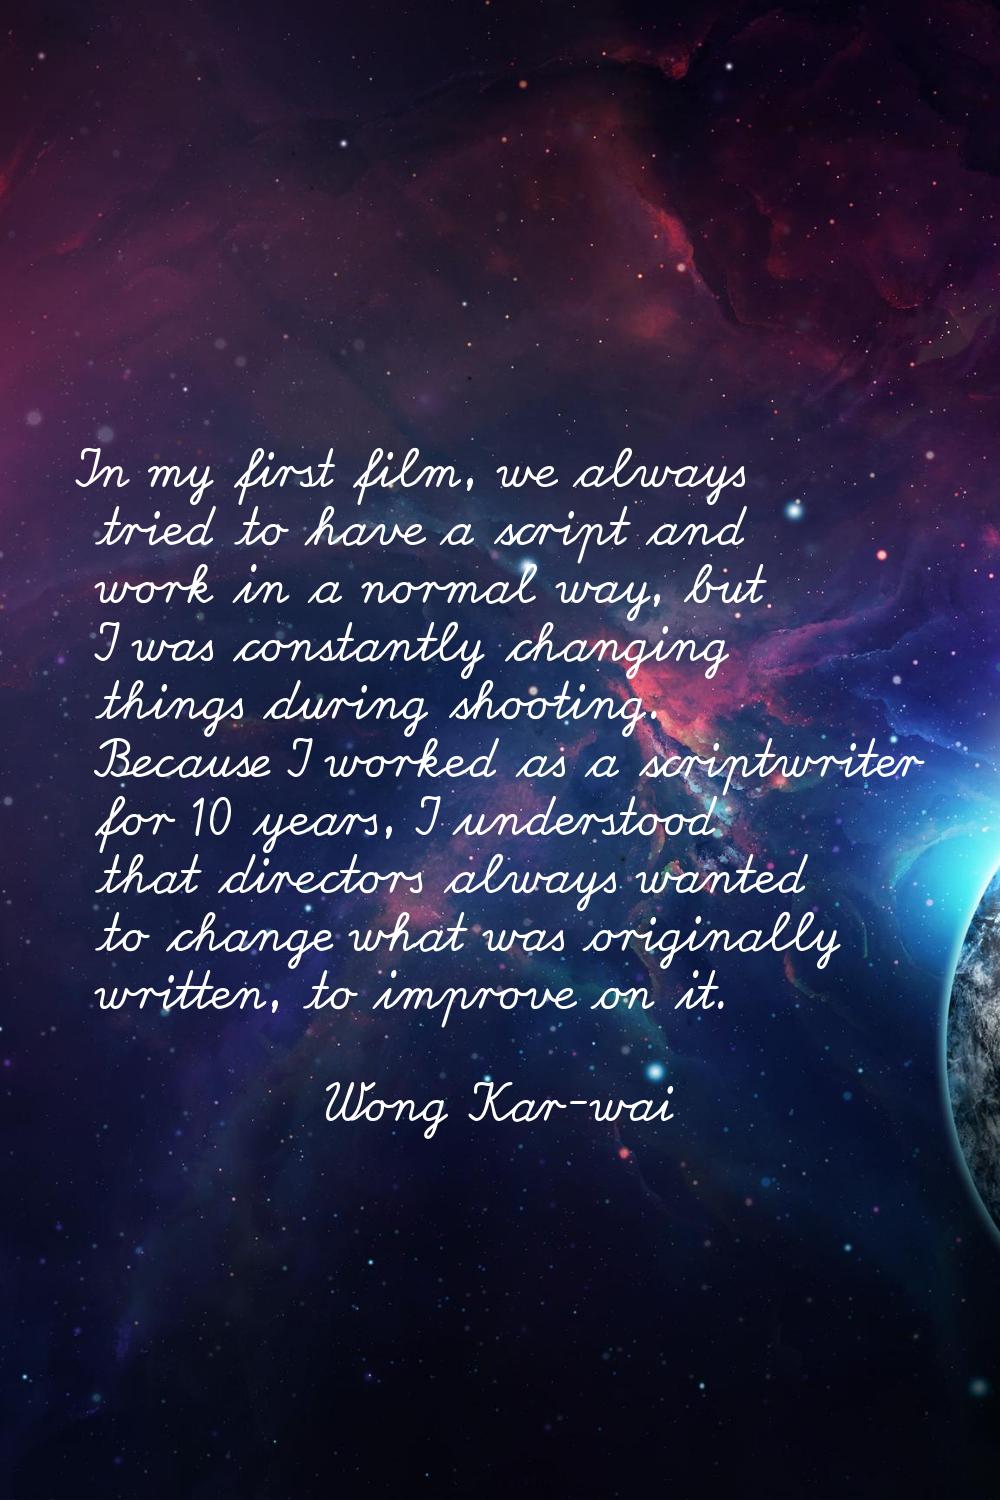 In my first film, we always tried to have a script and work in a normal way, but I was constantly c